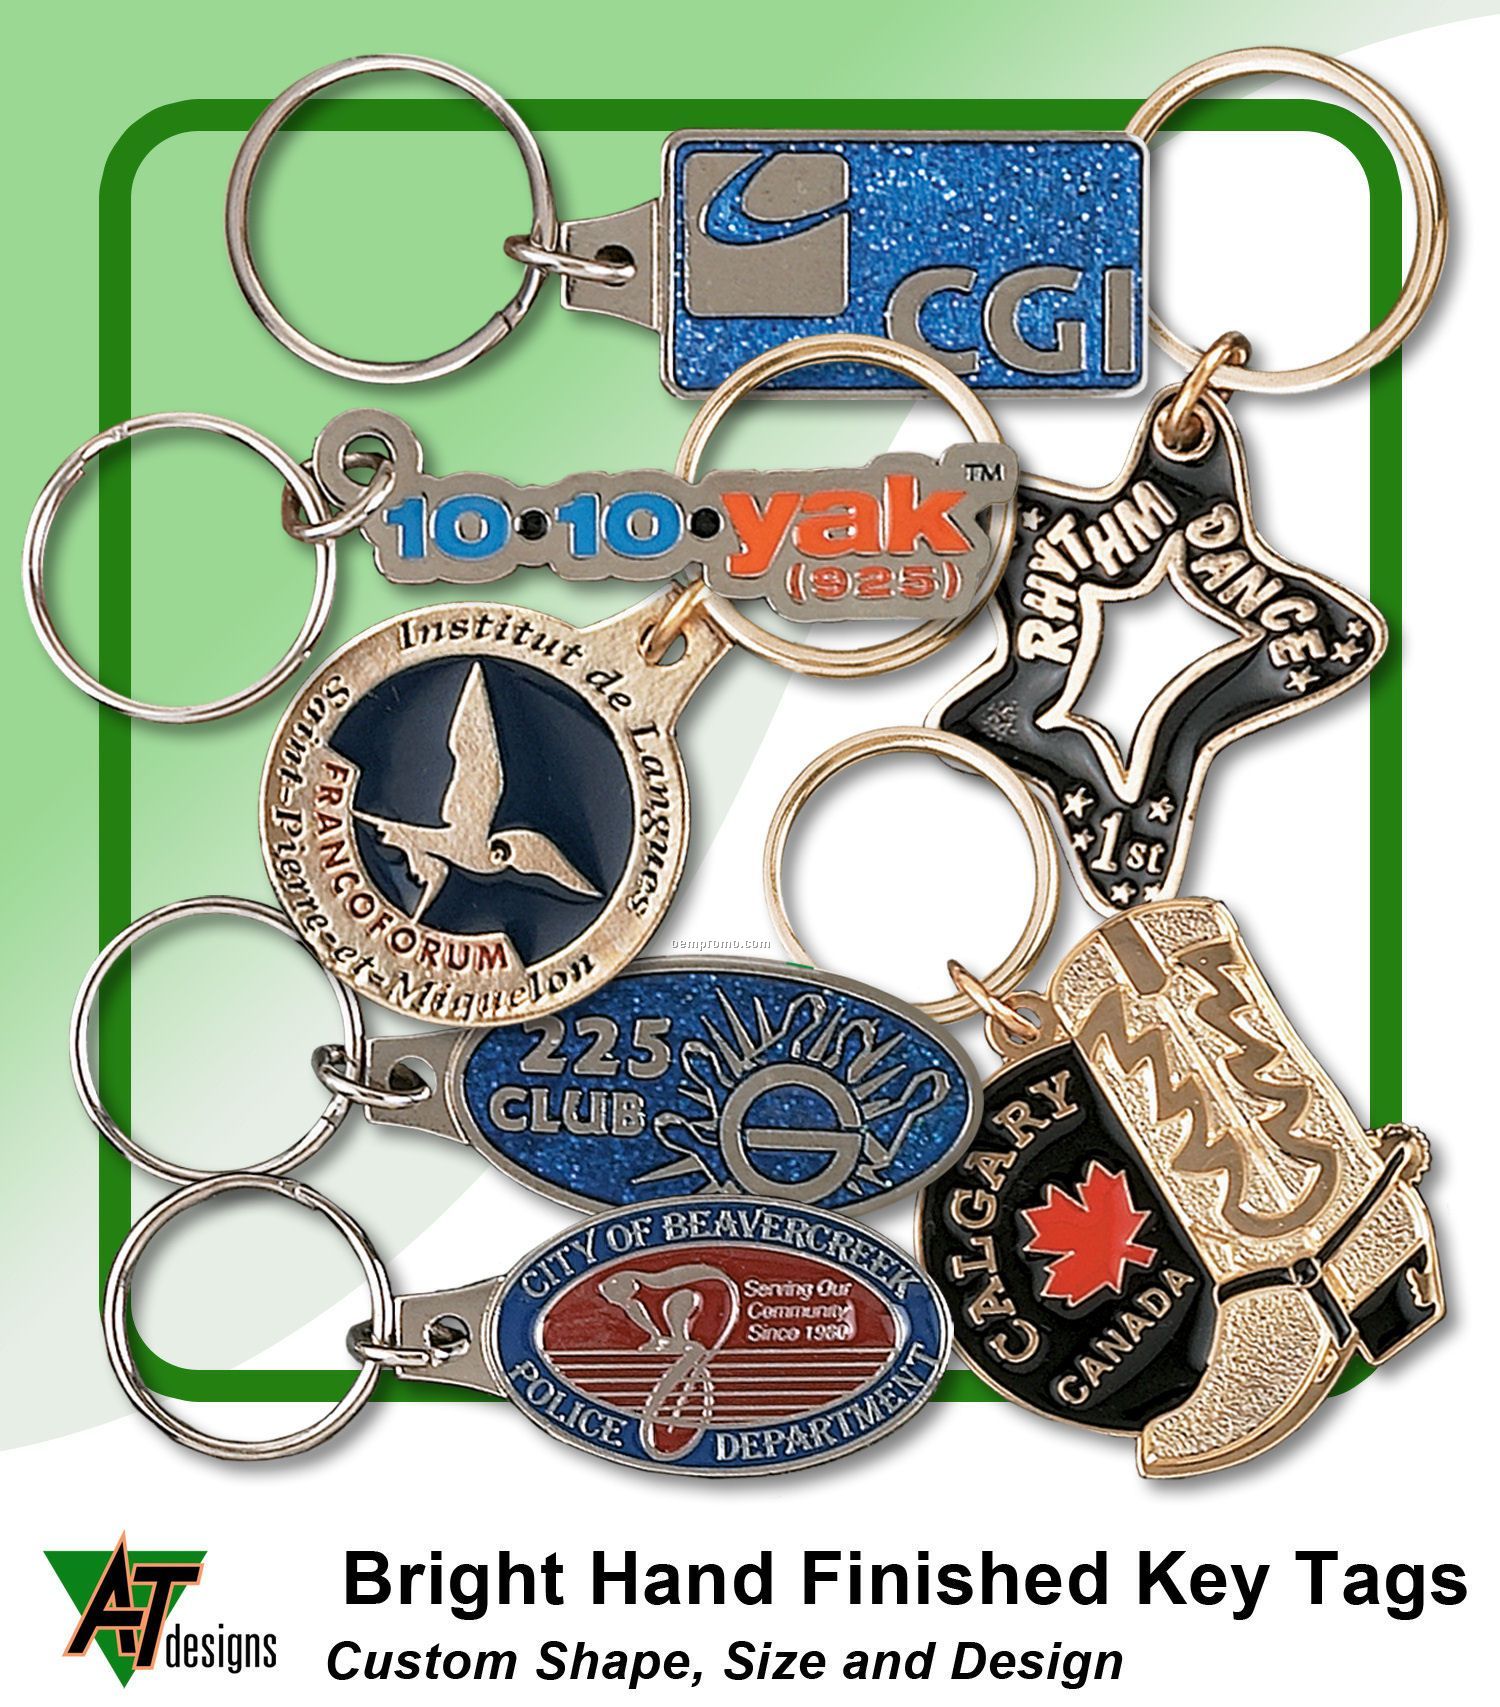 Bright Hand Finished Key Tags